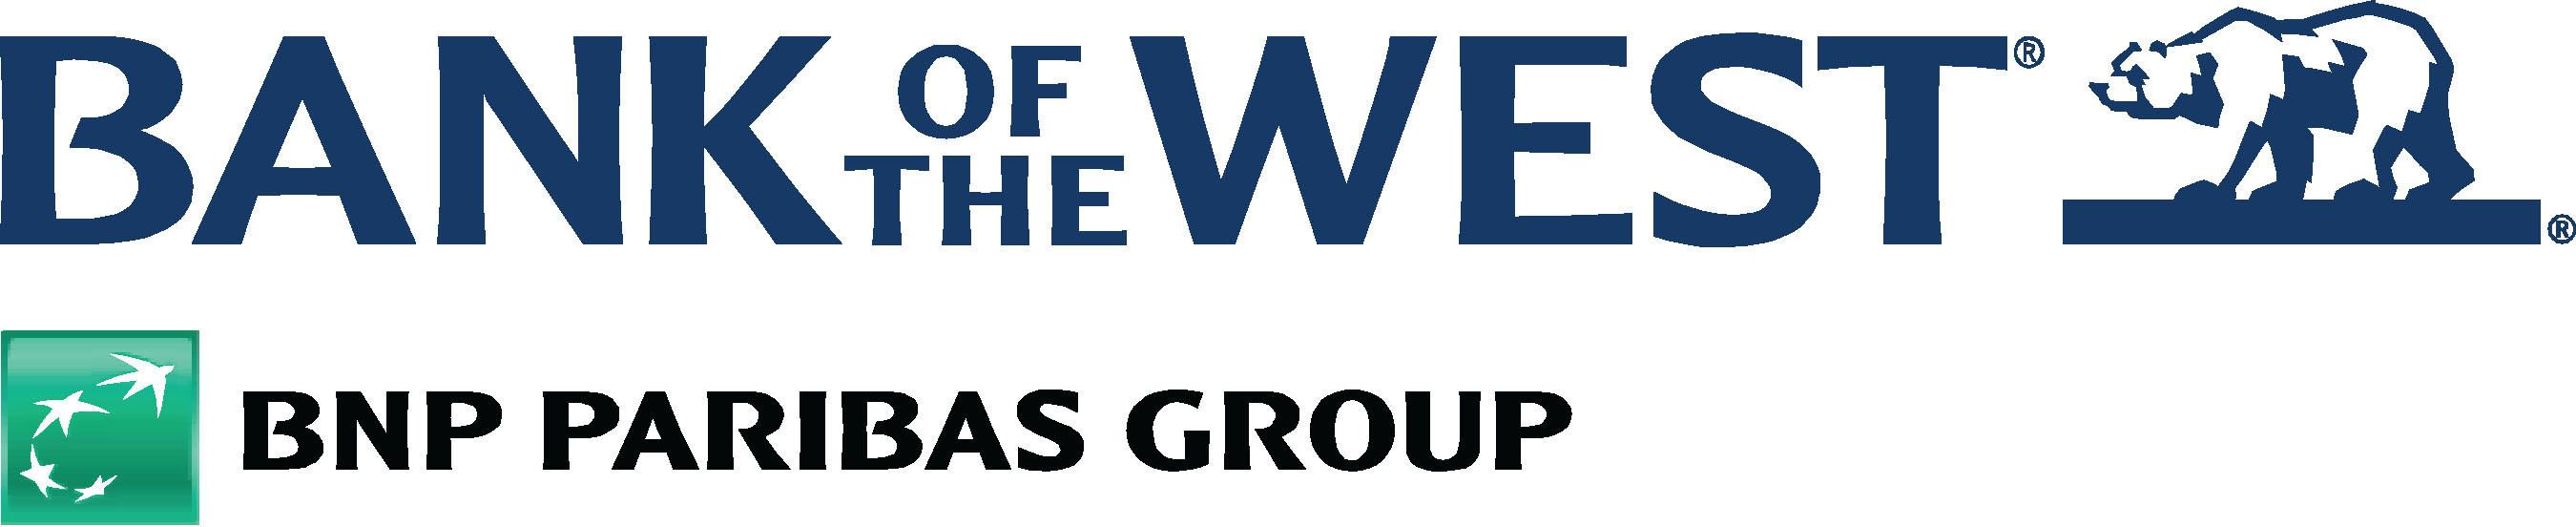 Bank of the West Brand Logo